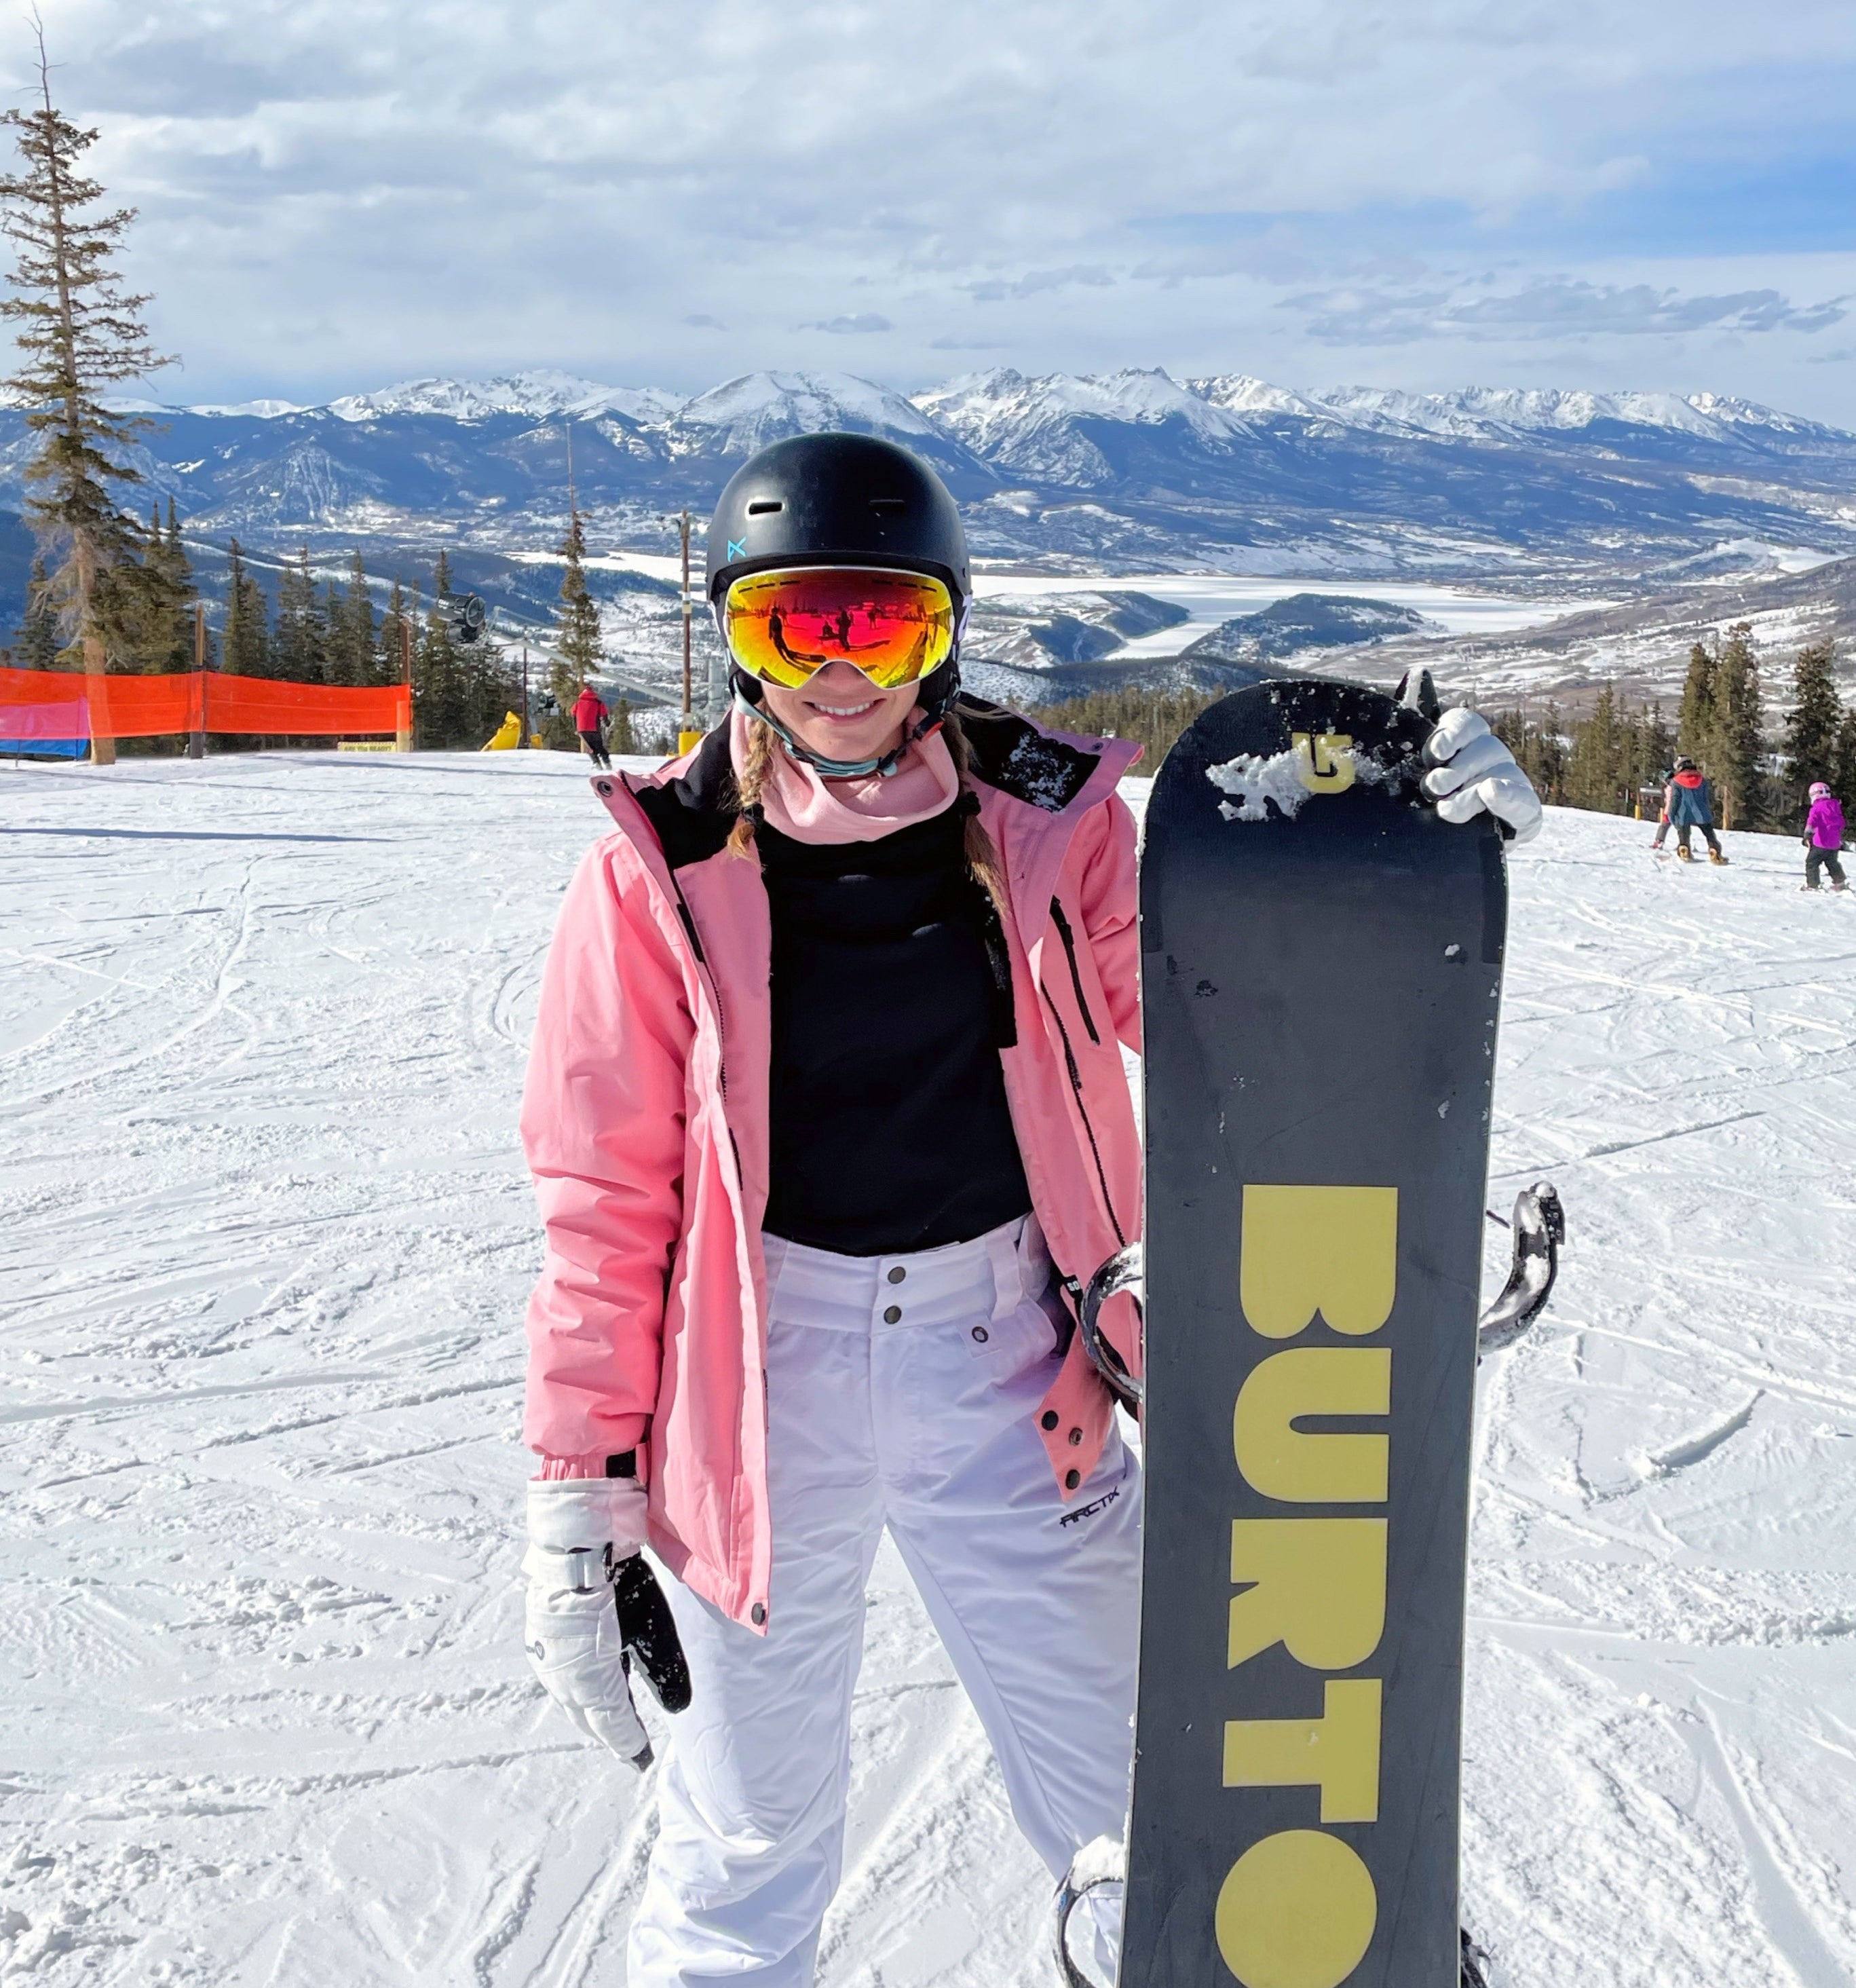 Reviewer out on the slopes in the white snowpants with snowboard